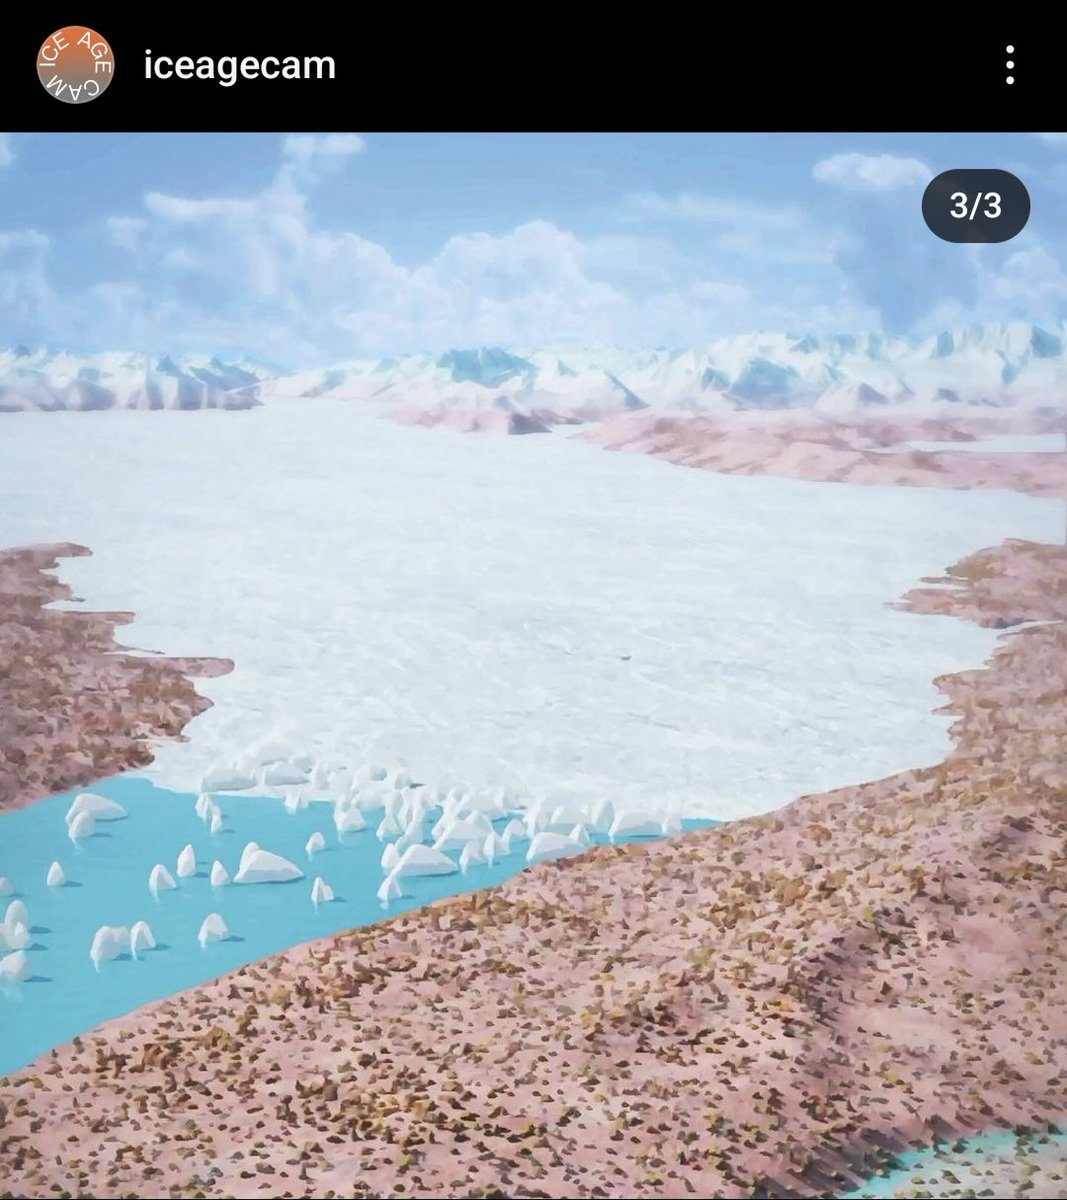 #SaveTheDate What will the future look like? Visit the IceAgeCam to find out! The launch of this interactive installation on ice age and #climate change will take place on 📅 26 March, 16:30 📍Felsenegg, ZH 💡iceagecam.ch @UZH_en @FGSE_UNIL @zhdk